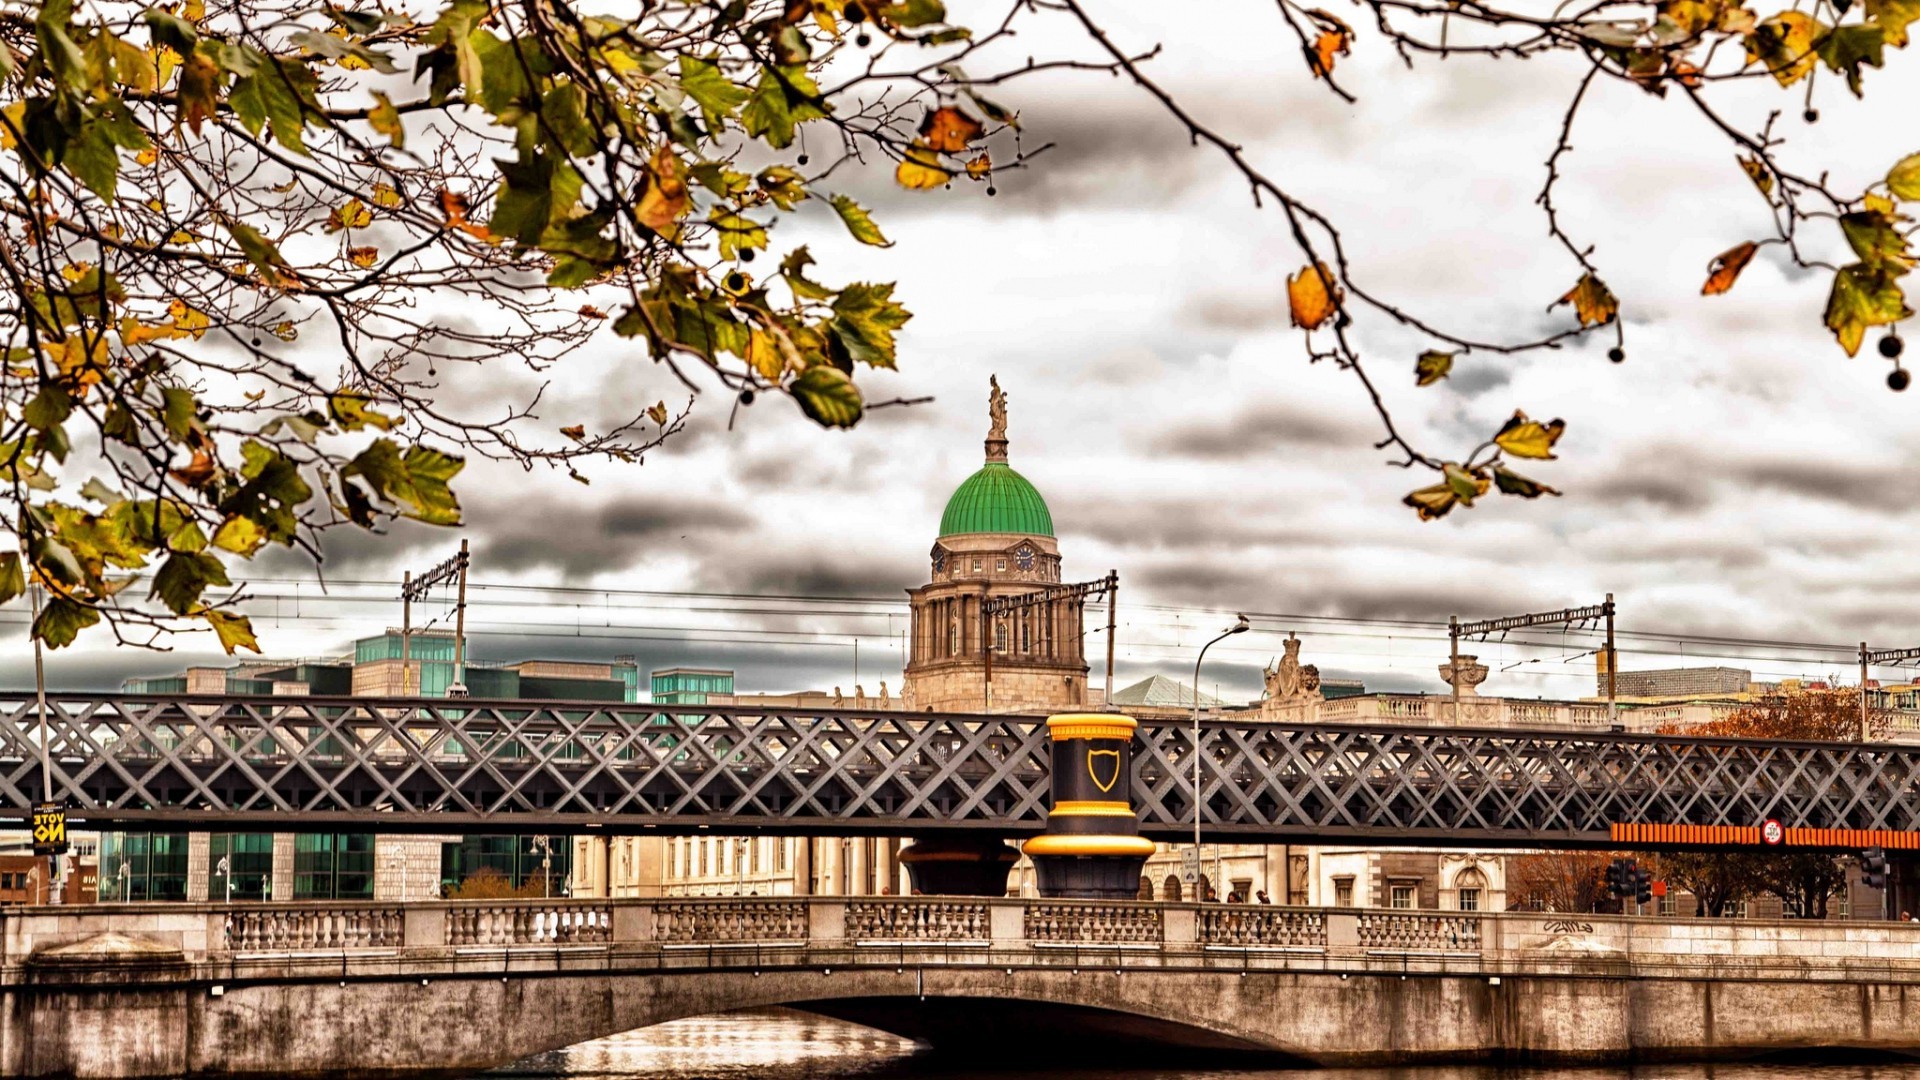 architecture, Cityscape, City, Capital, Building, Street, Dublin, Ireland, Bridge, Cathedral, Trees, Leaves, Clouds, HDR, River Wallpaper